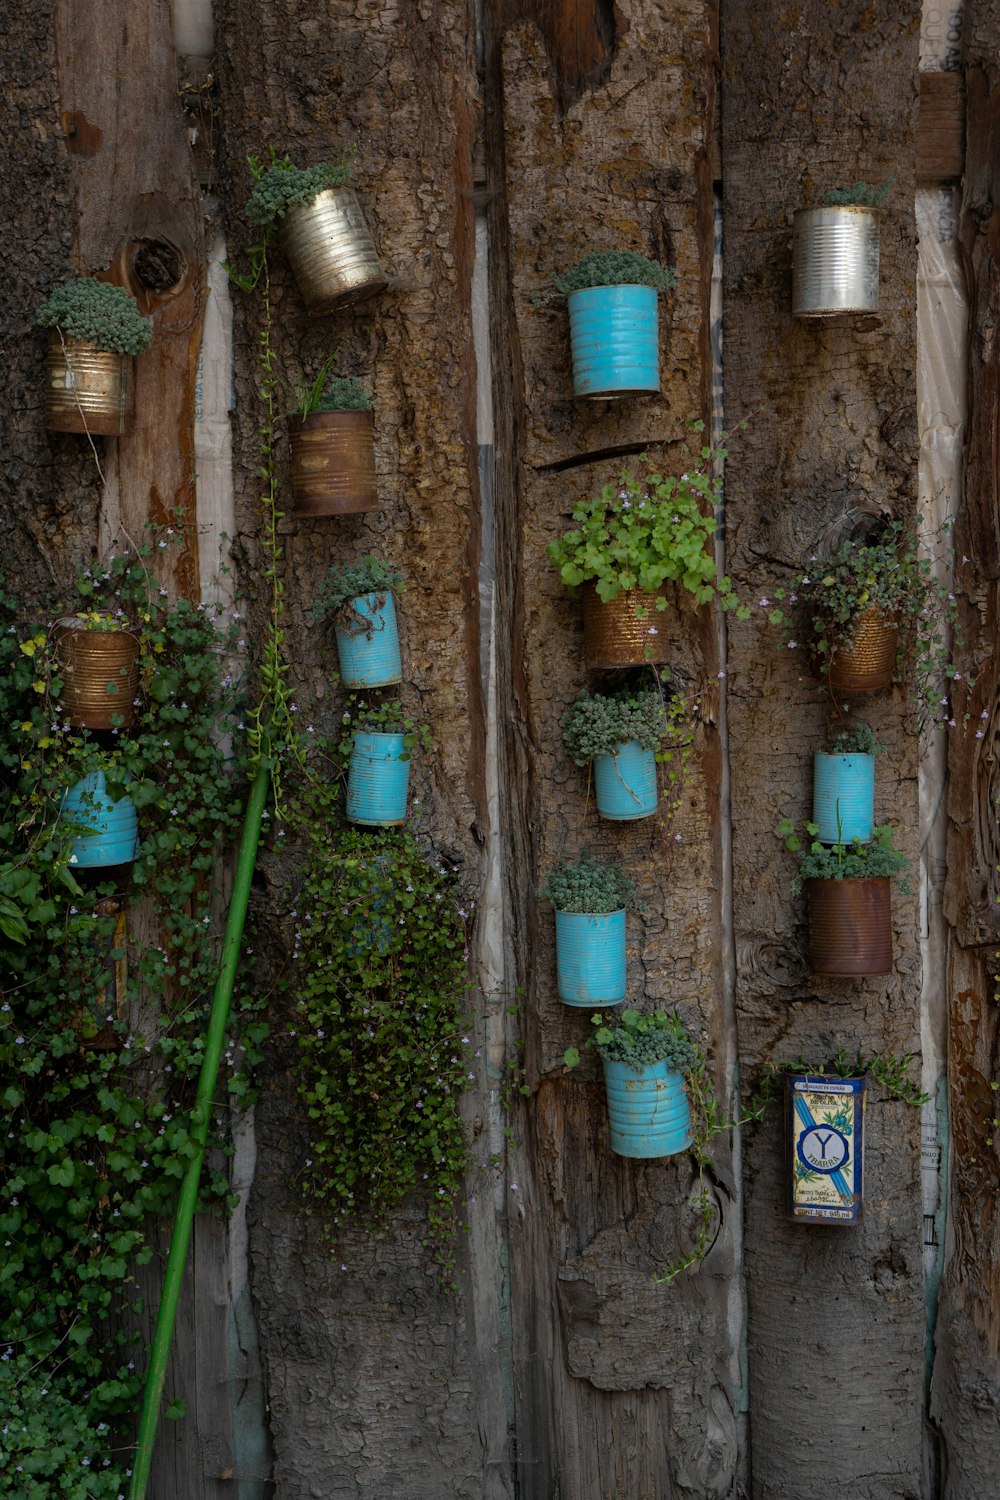 cans turned into plant pots hanging on wall